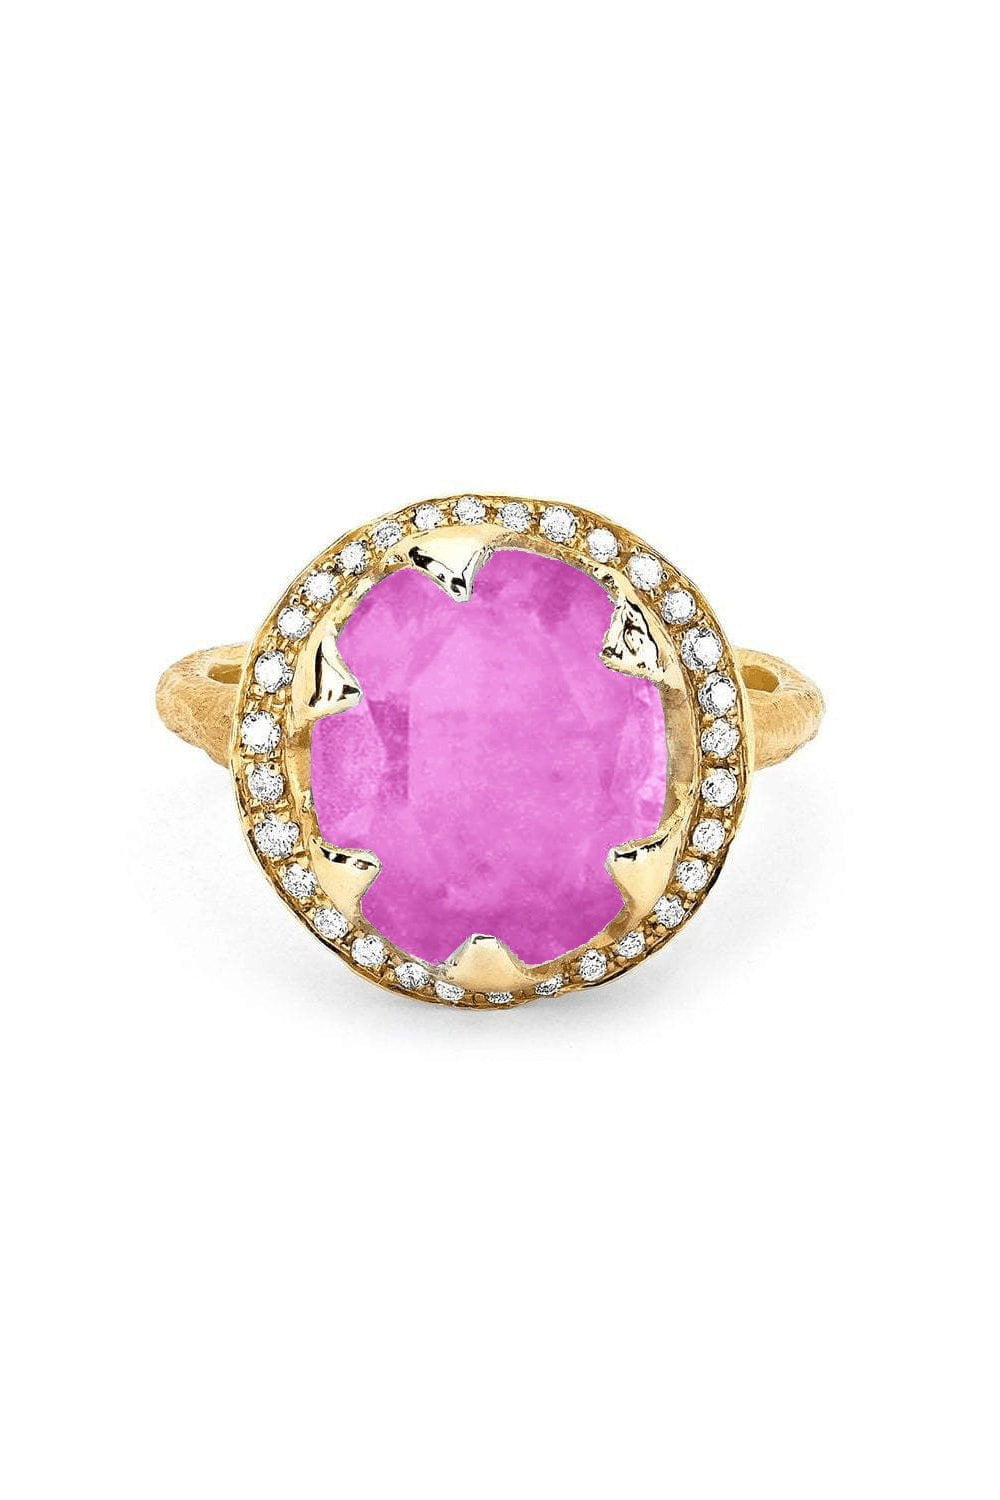 Baby Queen Full Pave Halo Pink Sapphire Ring JEWELRYFINE JEWELRING LOGAN HOLLOWELL   